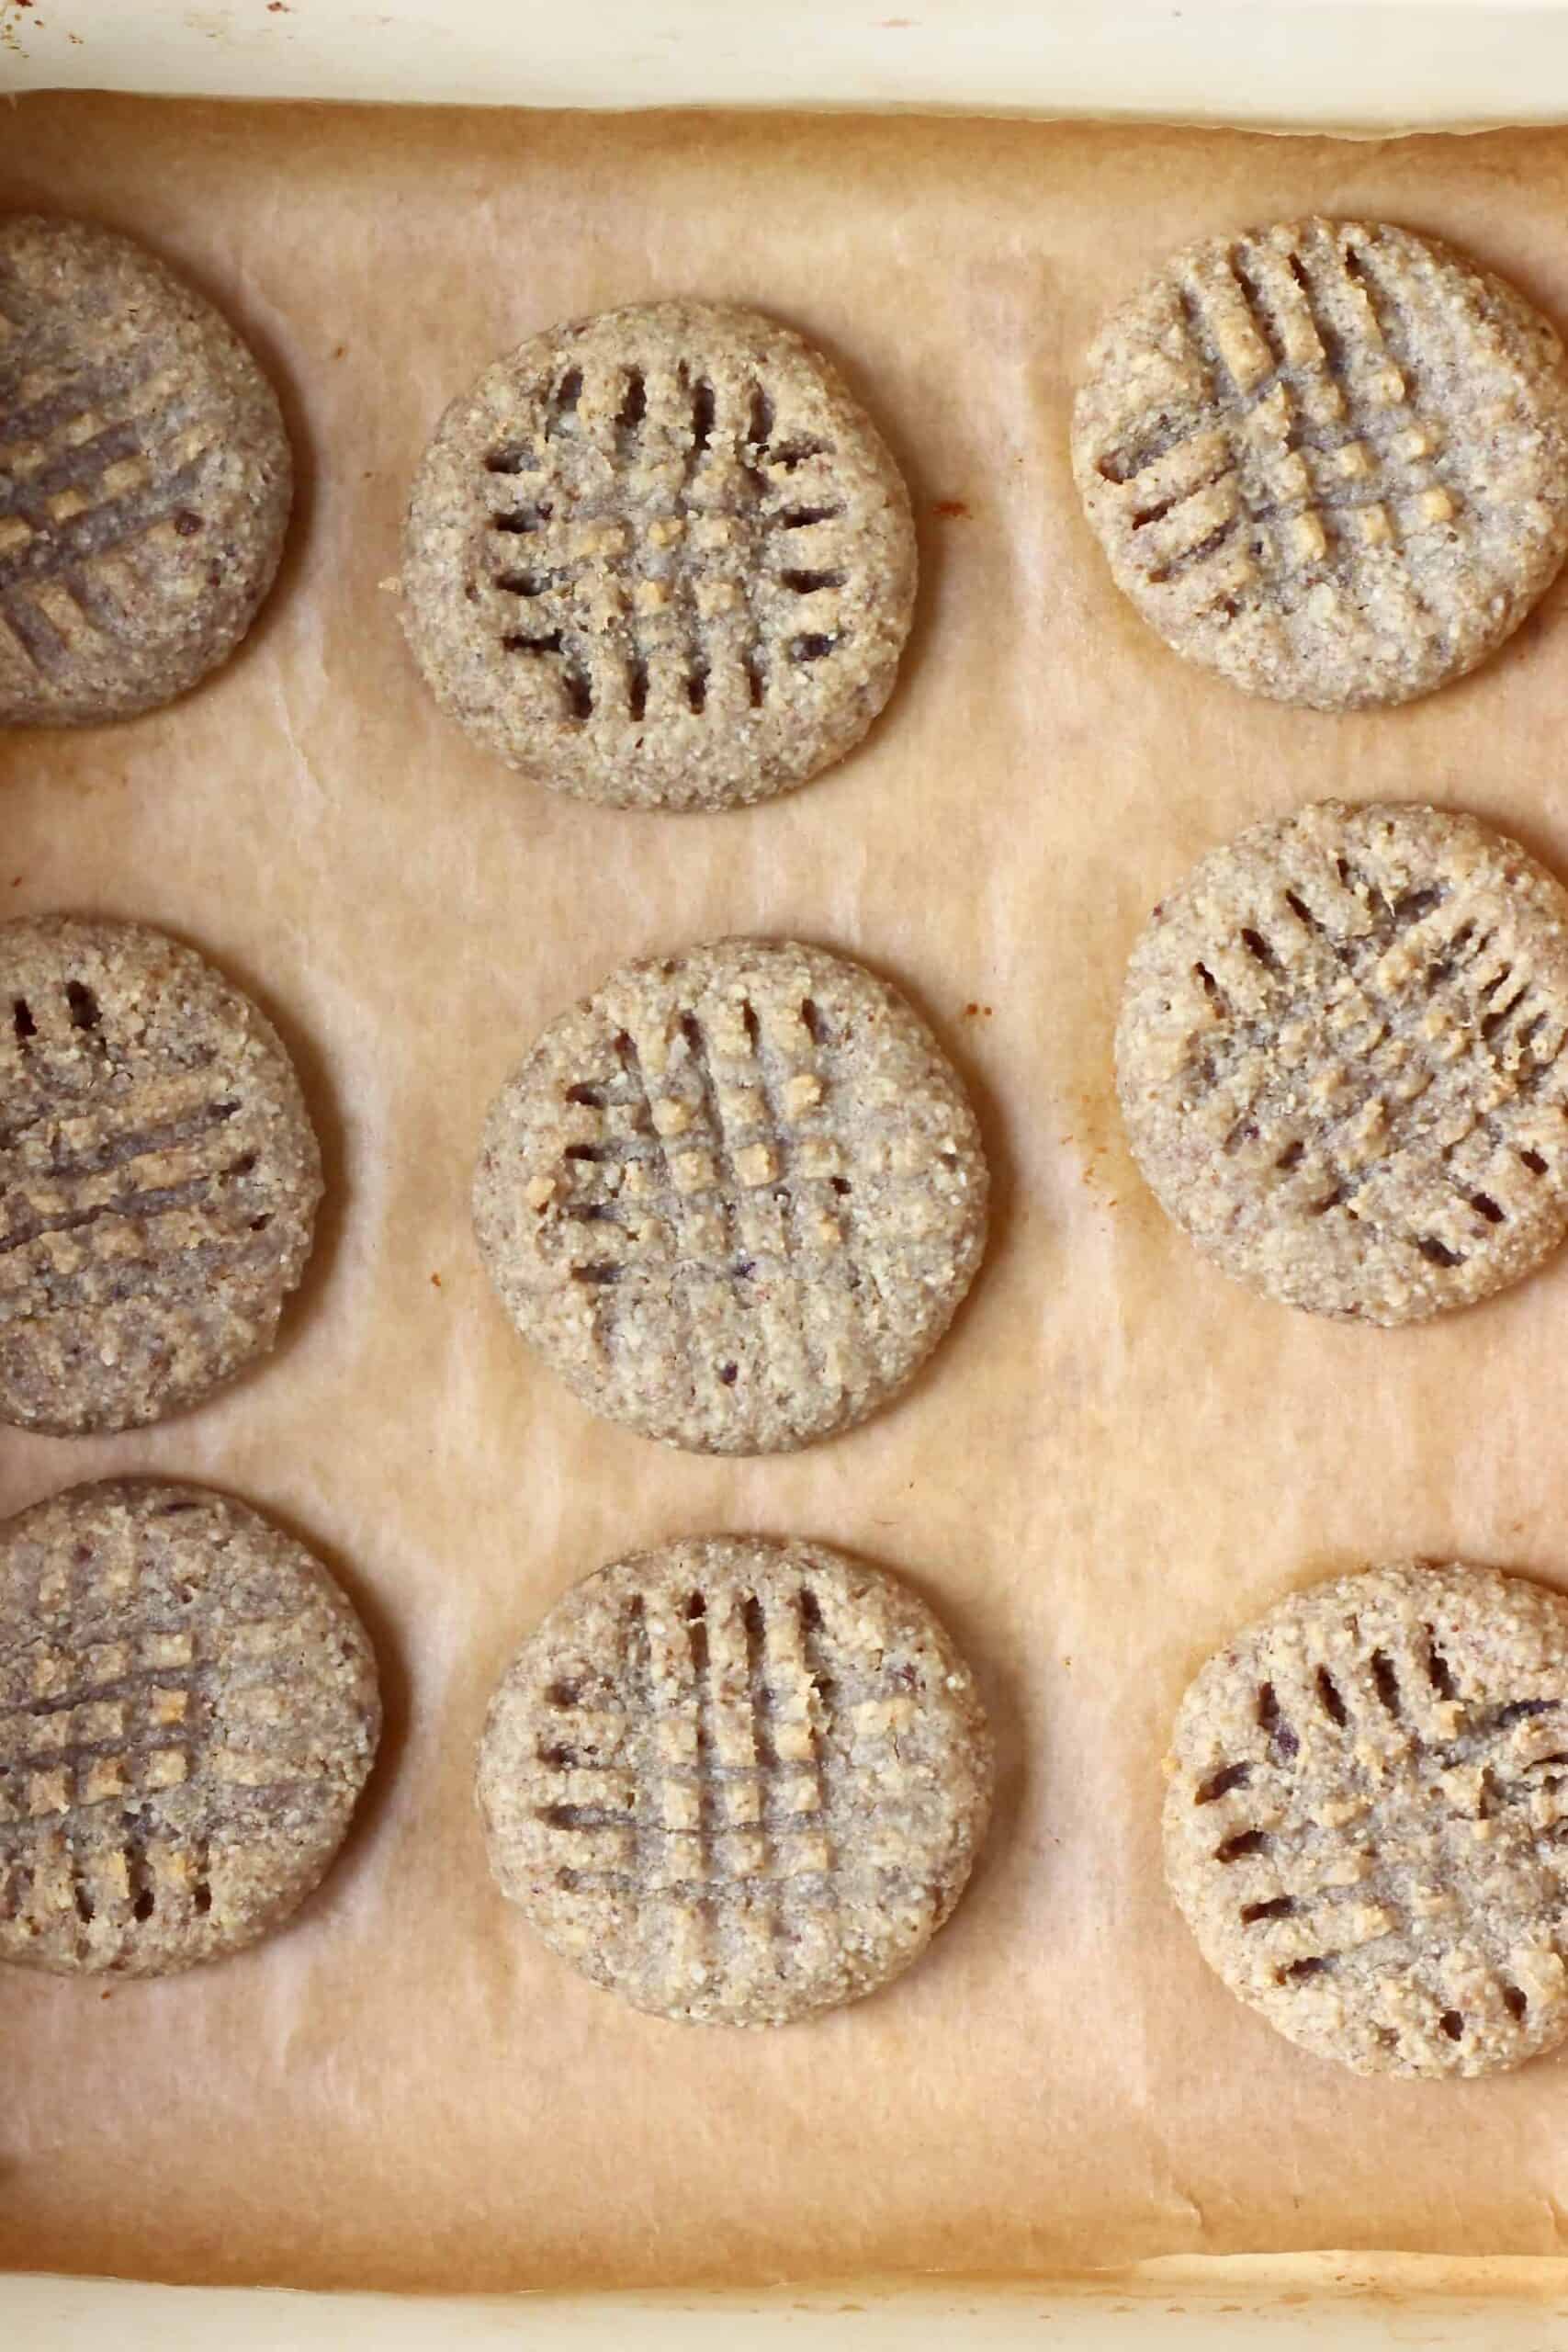 Nine gluten-free vegan peanut butter cookies on a baking tray lined with baking paper